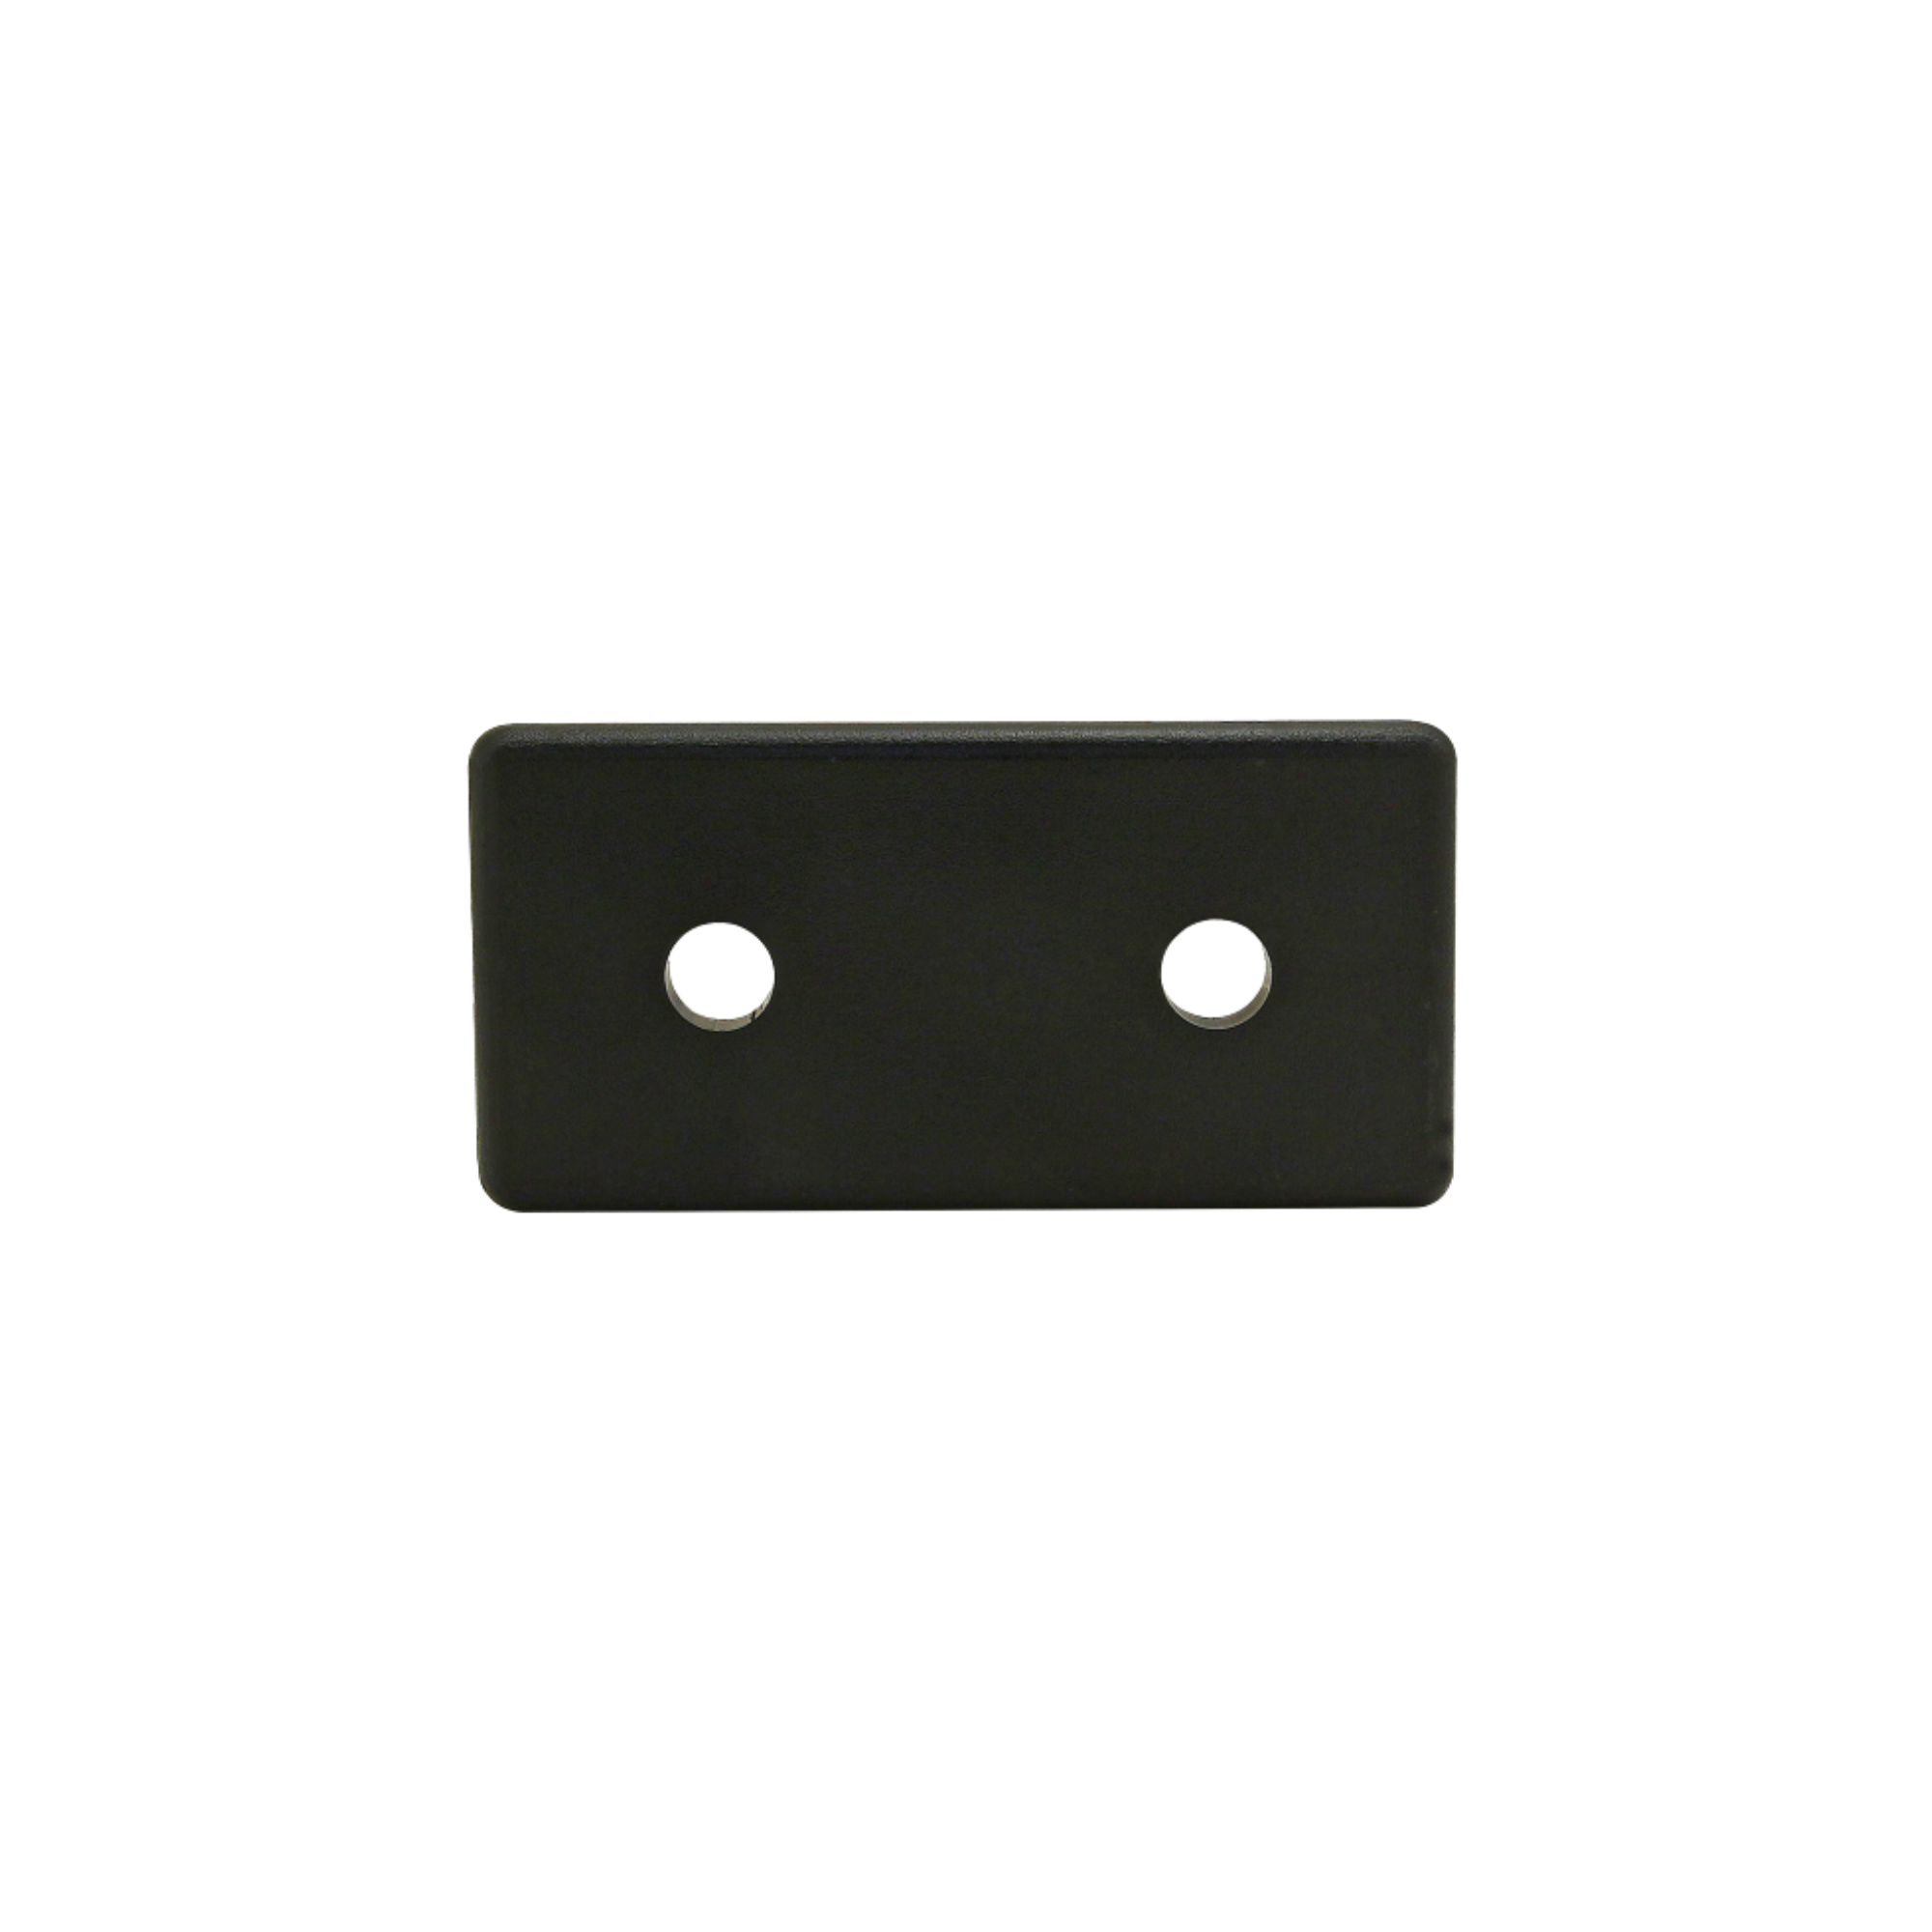 side view of a black rectangular end cap with two mounting holes